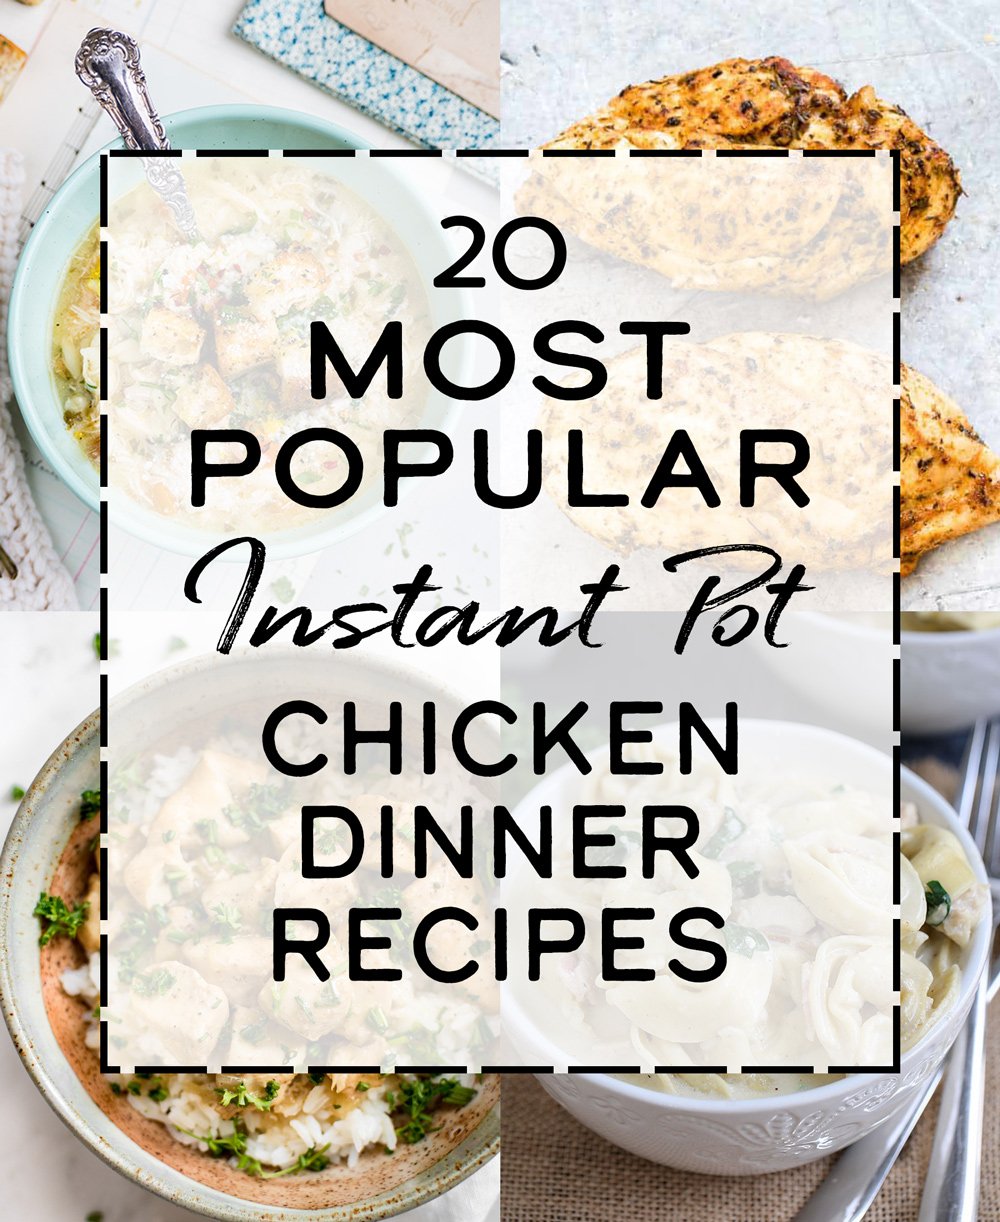 Cover photo with text for article 20 most popular instant pot chicken dinner recipes